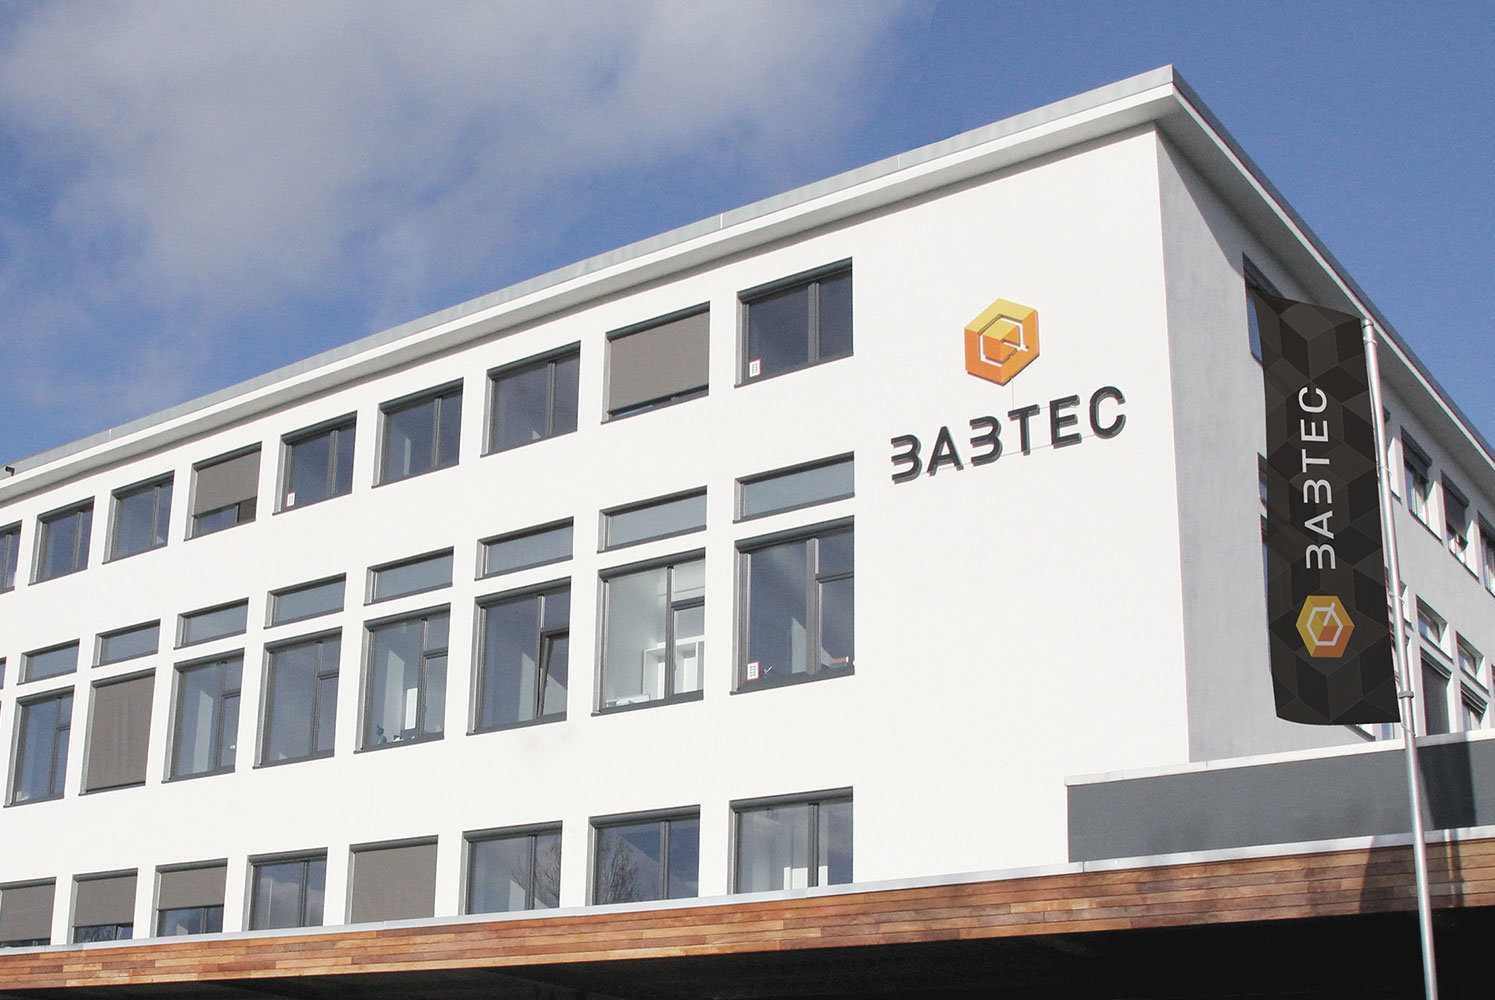 Babtec company building in Wuppertal